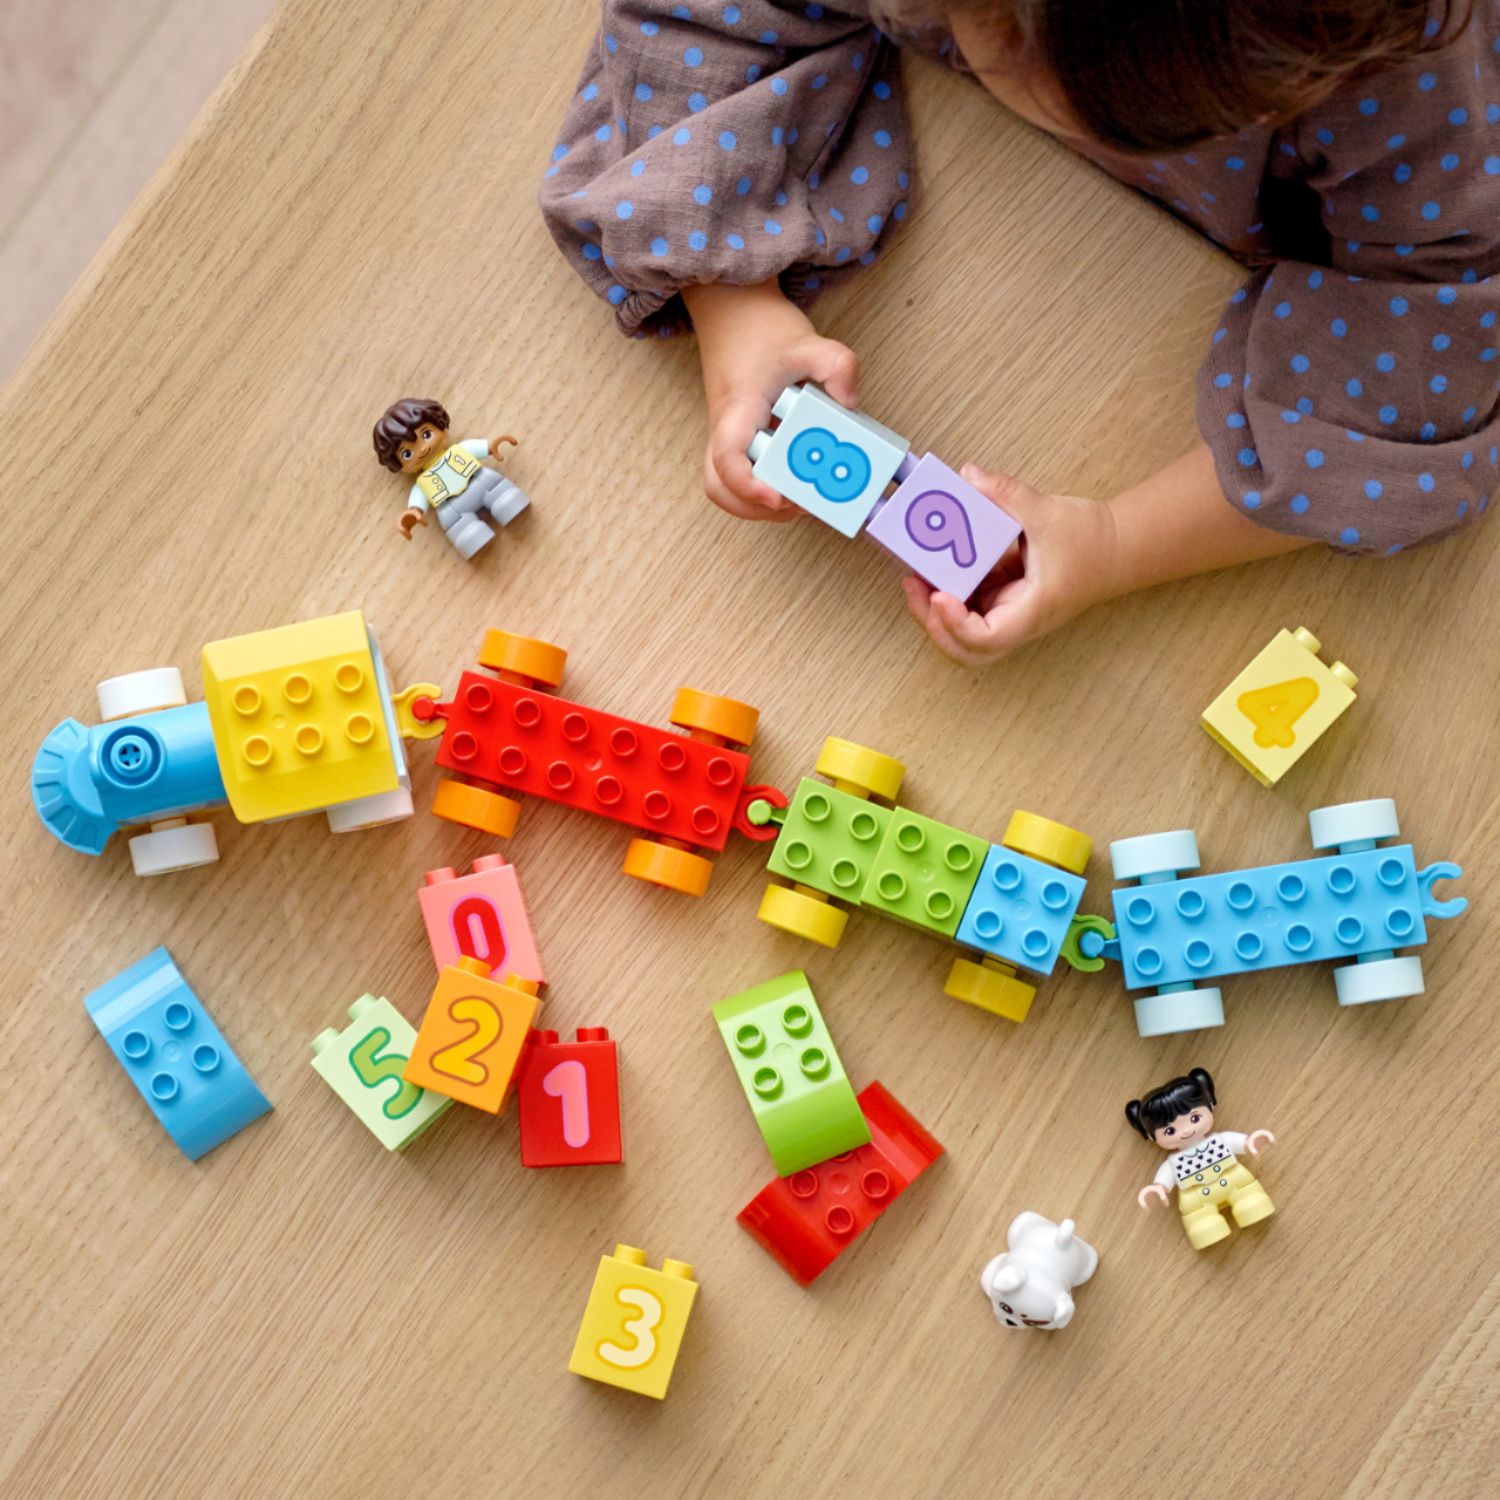 LEGO DUPLO My First Number Train 10954 Fine Motor Skills Toy with Bricks  for Learning Numbers, Preschool Educational Toys for 1.5 - 3 Year Old  Toddlers, Girls & Boys, Early Development Activity Set 